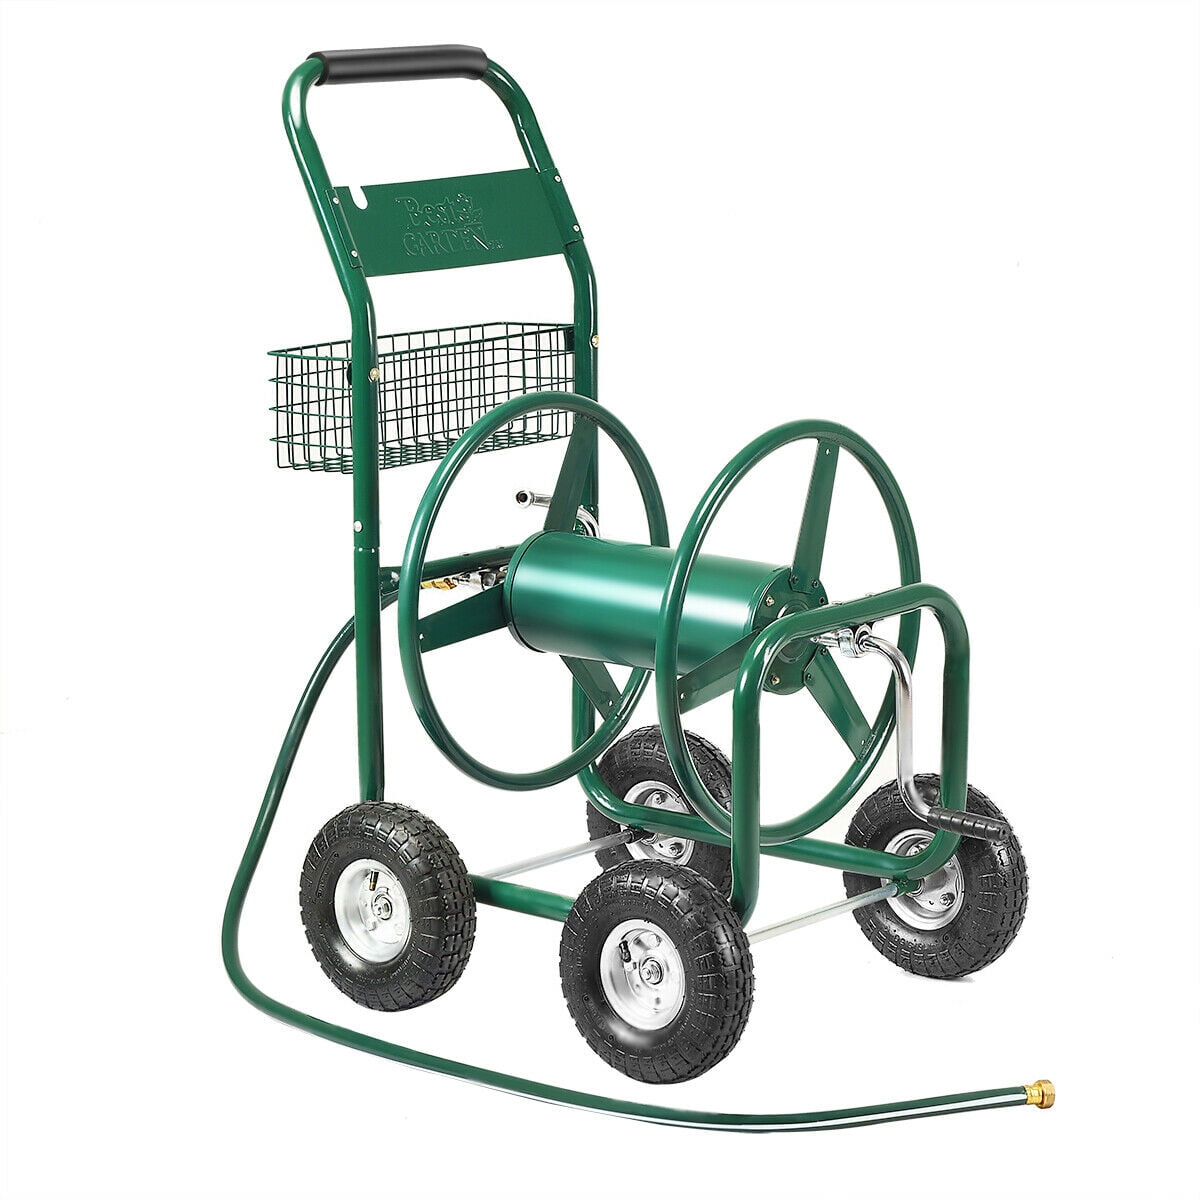 Best Outdoor Garden Hose Reel Cart New Garden Hose Reel Cart 4 Wheel with Basket Lawn Watering Outdoor Heavy Duty Yard Water Planting Holds Up to 300FT Tubular Steel with Green Powder Coated 